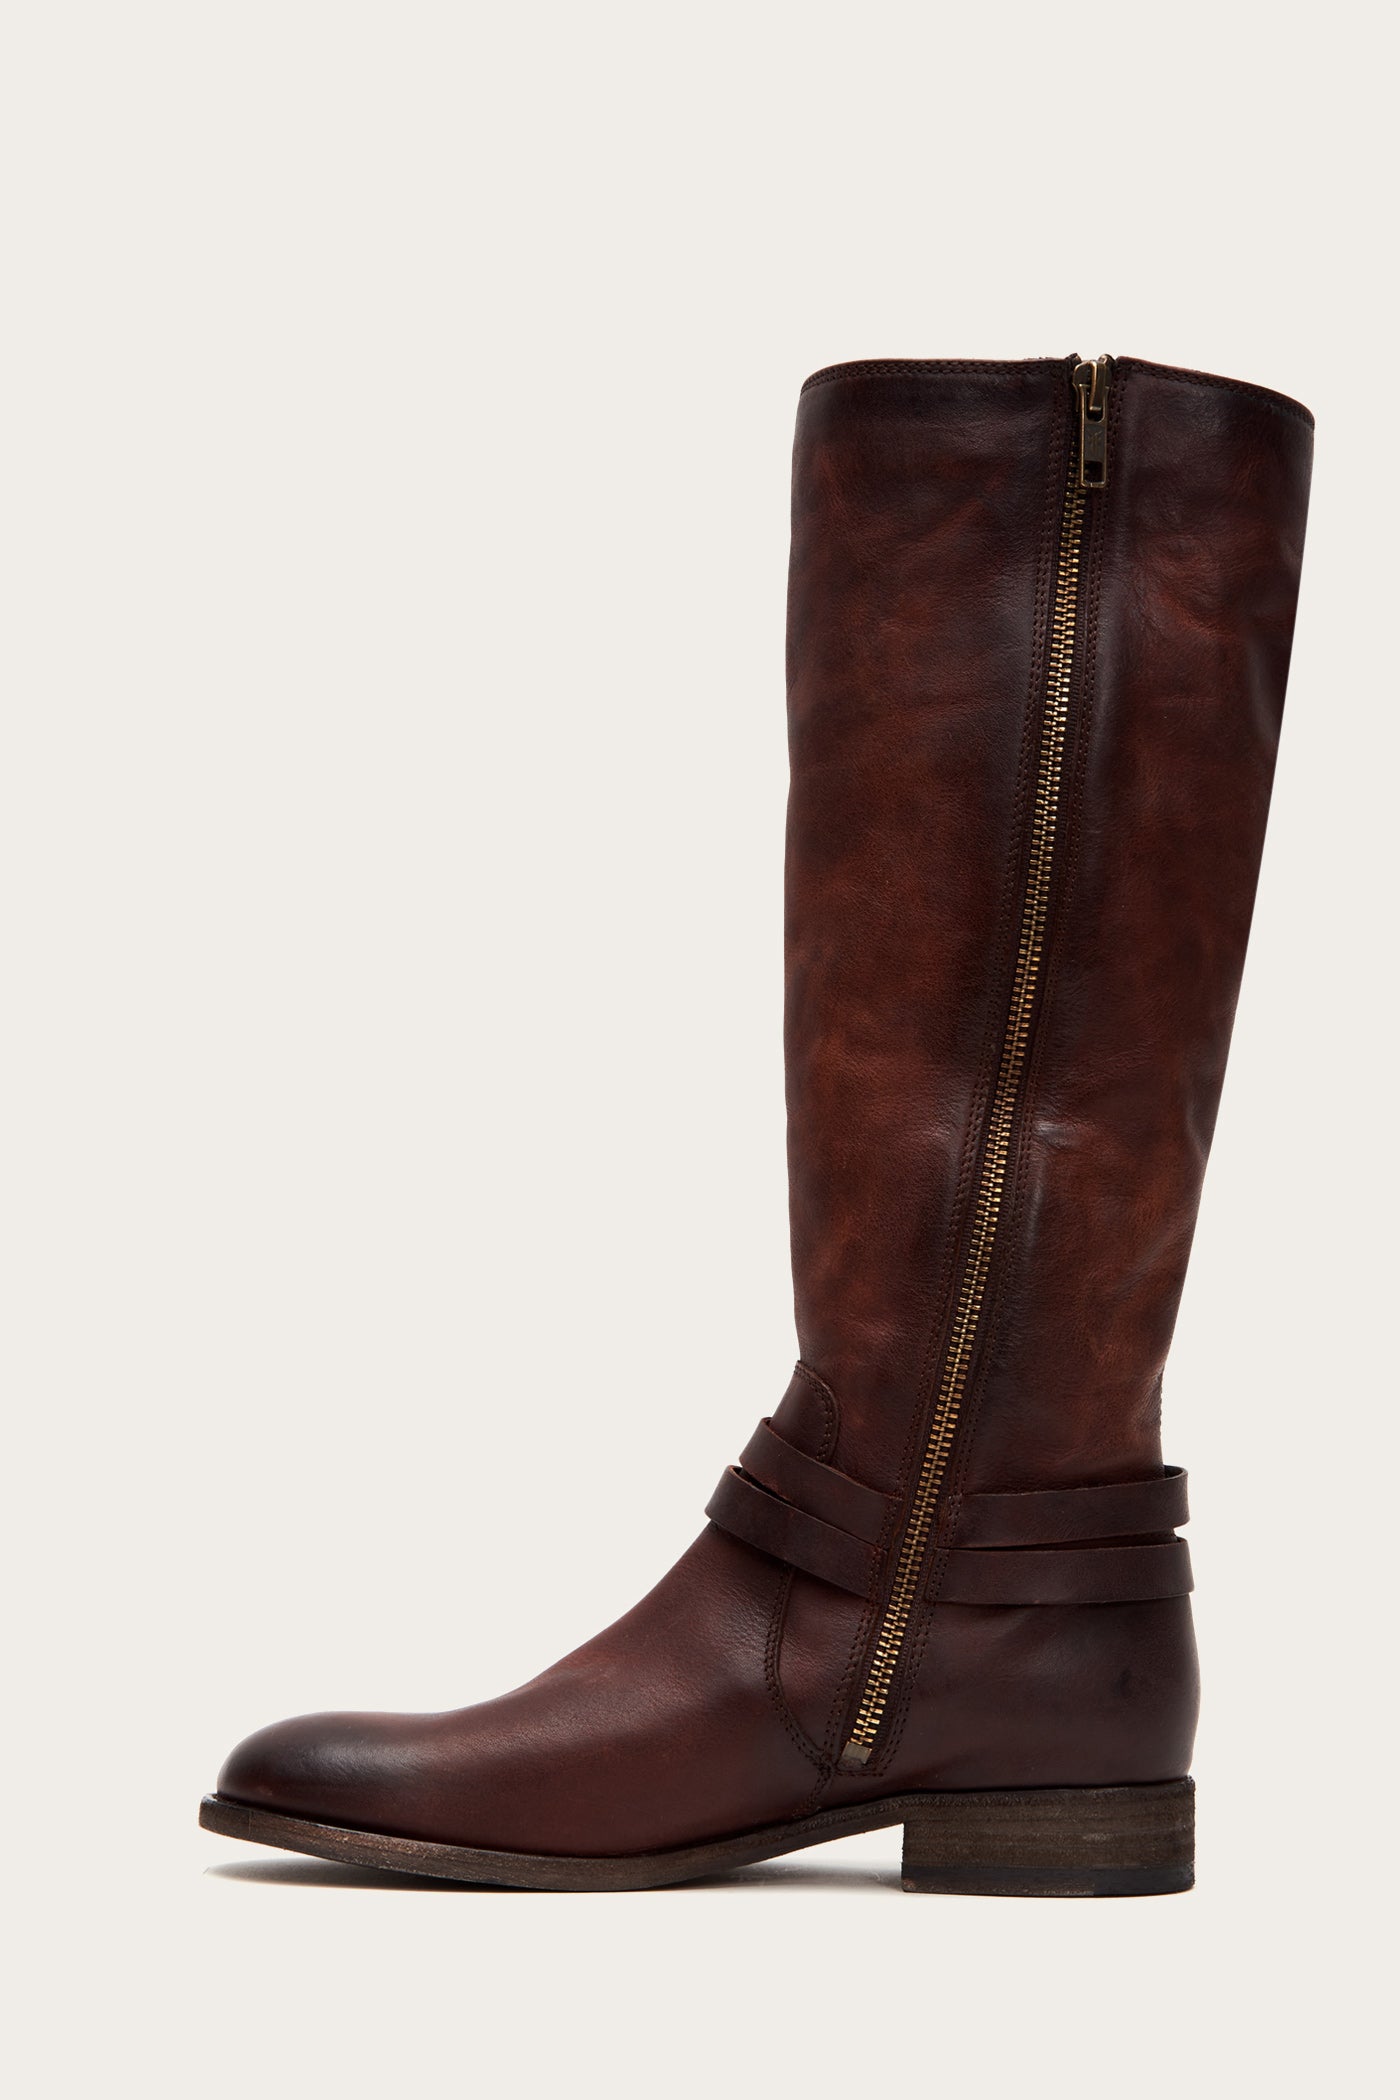 Melissa Belted Tall Wide Calf | FRYE Since 1863